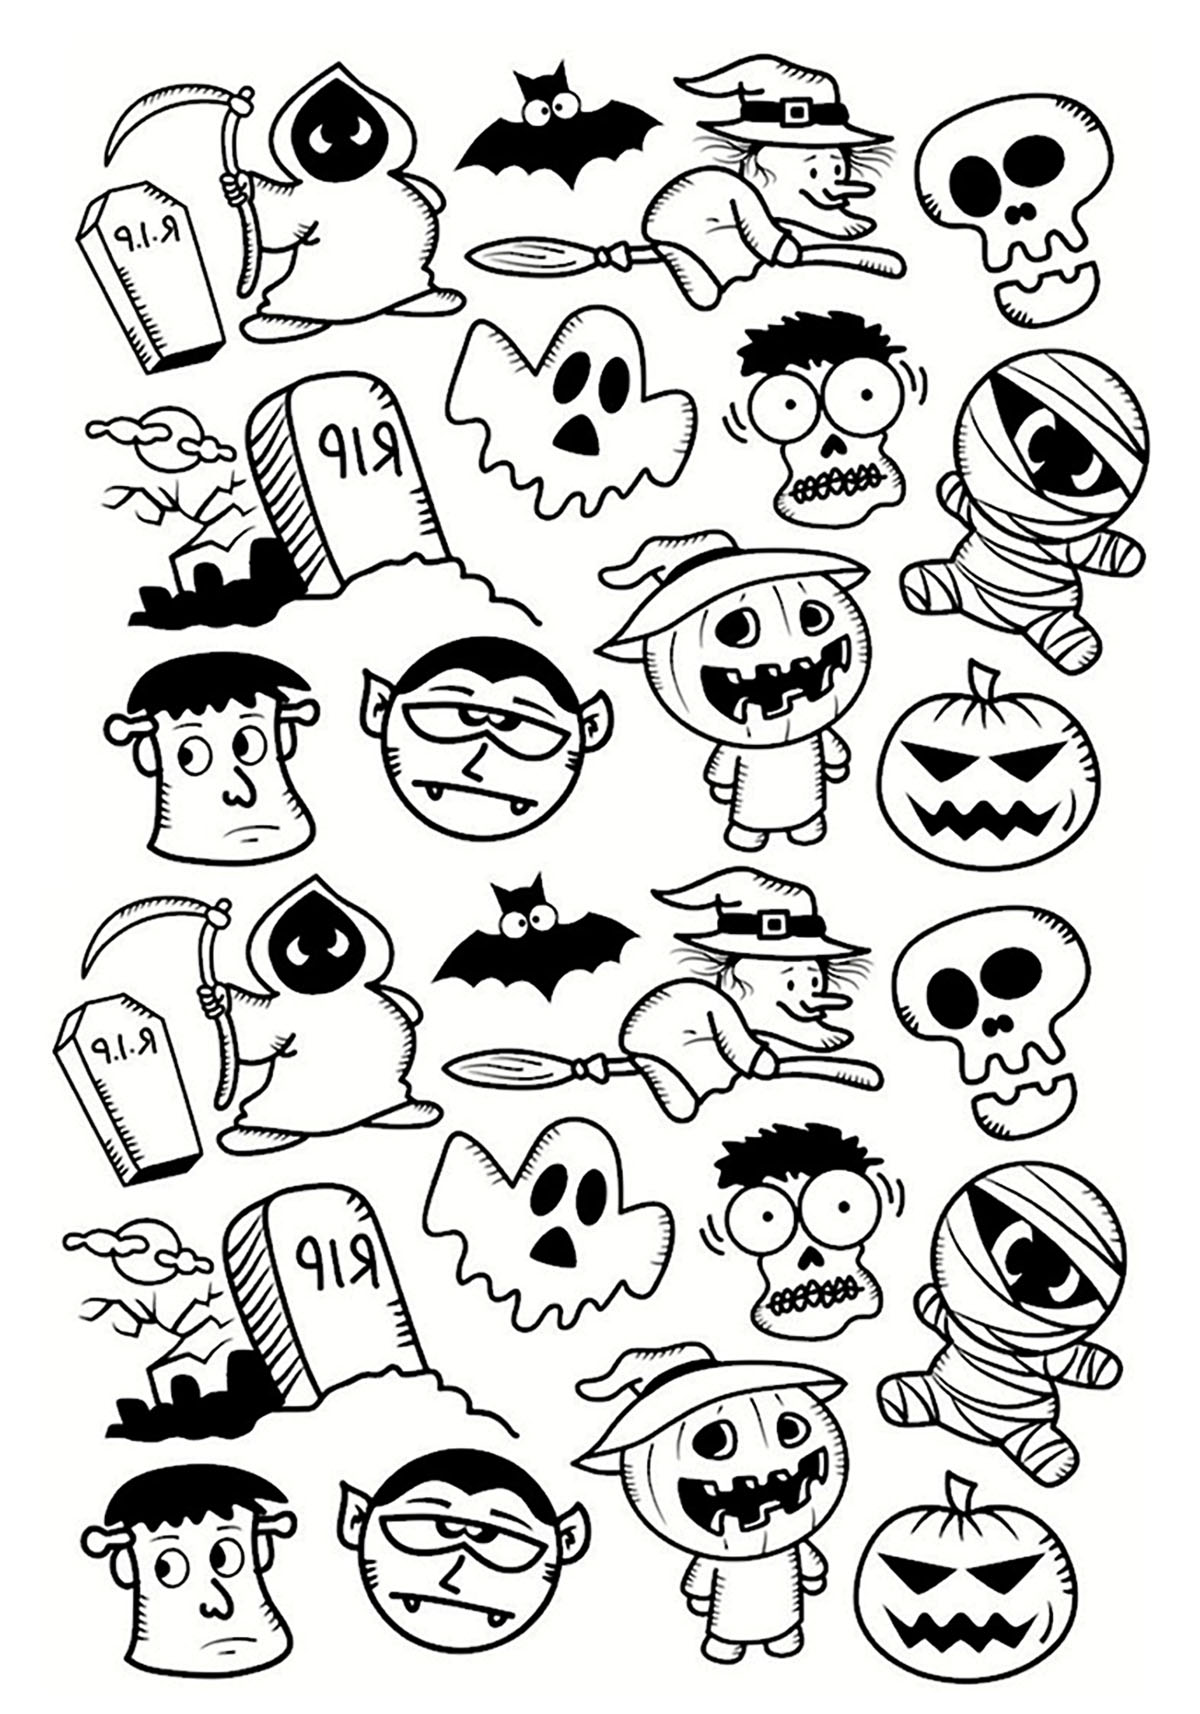 Halloween doodle personnages - Halloween - Coloriages ...